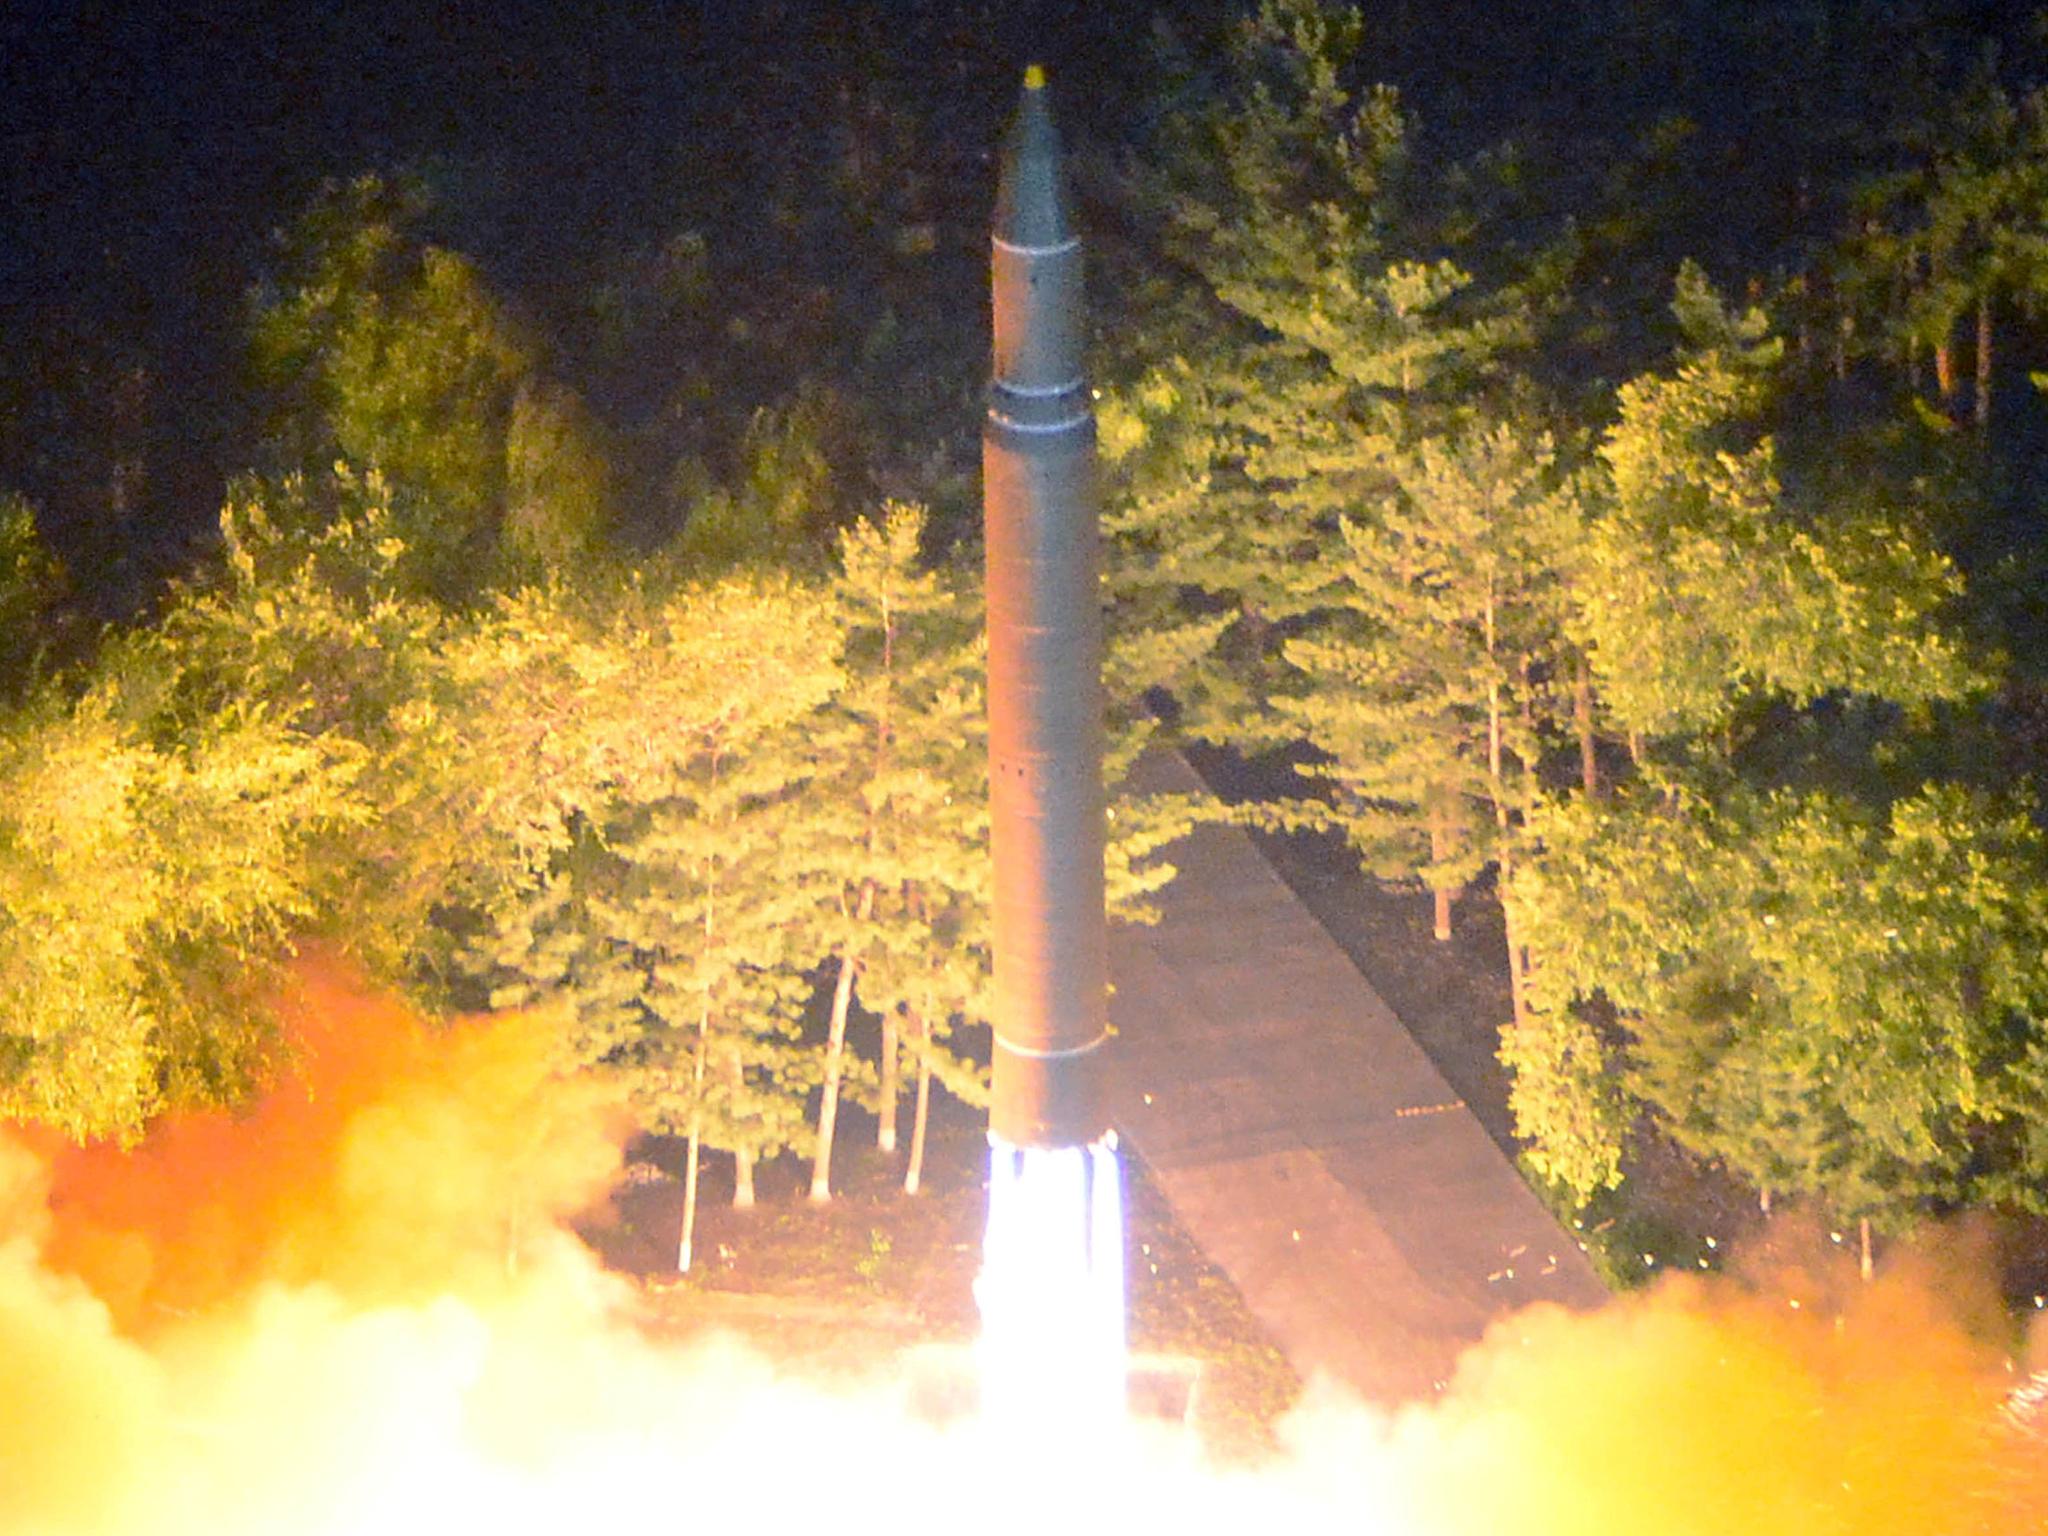 The new sanctions follow two missile tests by the North Korean regime in July